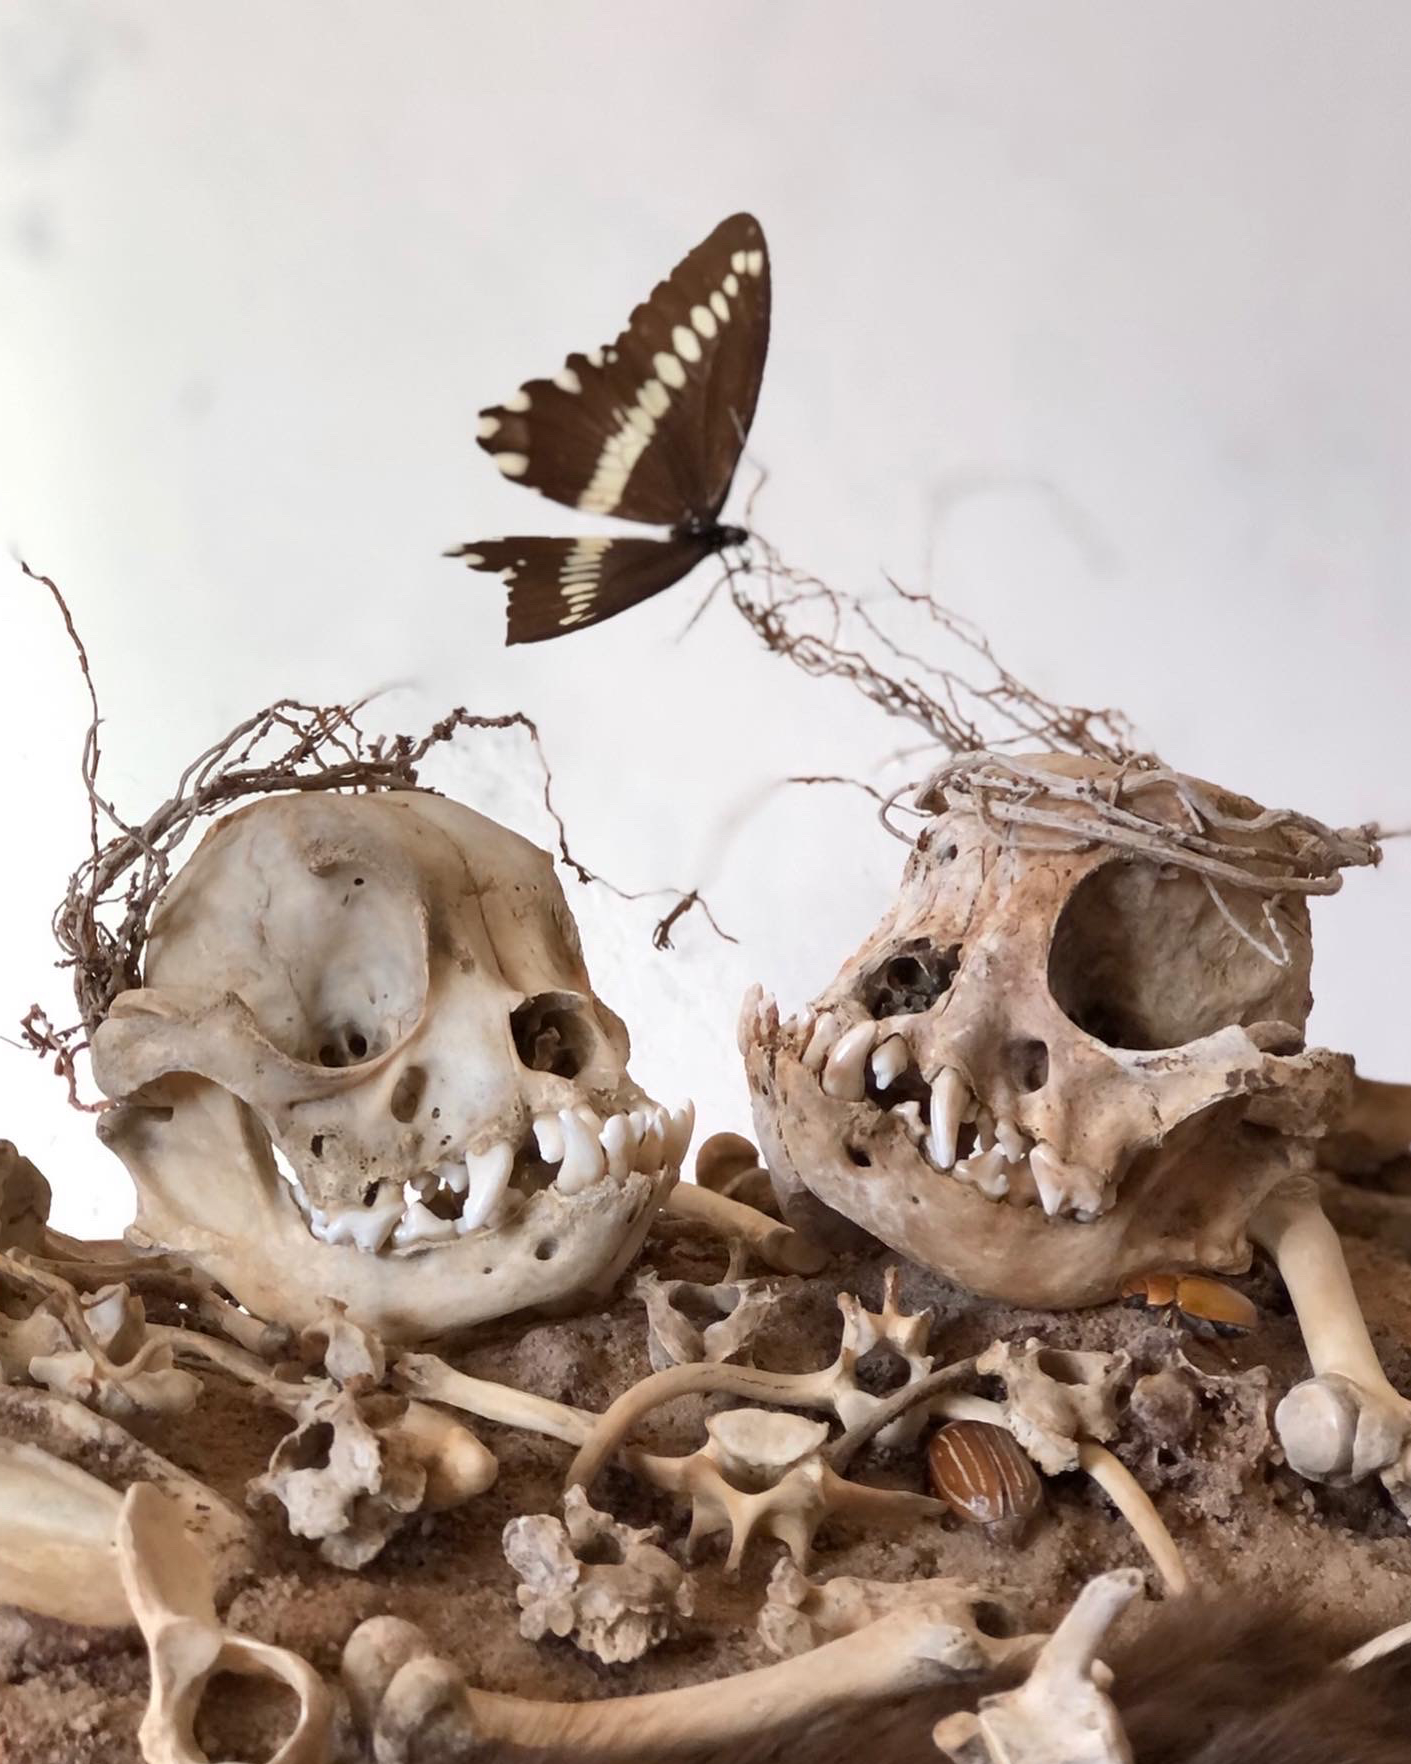 Two weathered small dog skulls with bones arranged in front of them and a butterfly perched on a branch above the skulls